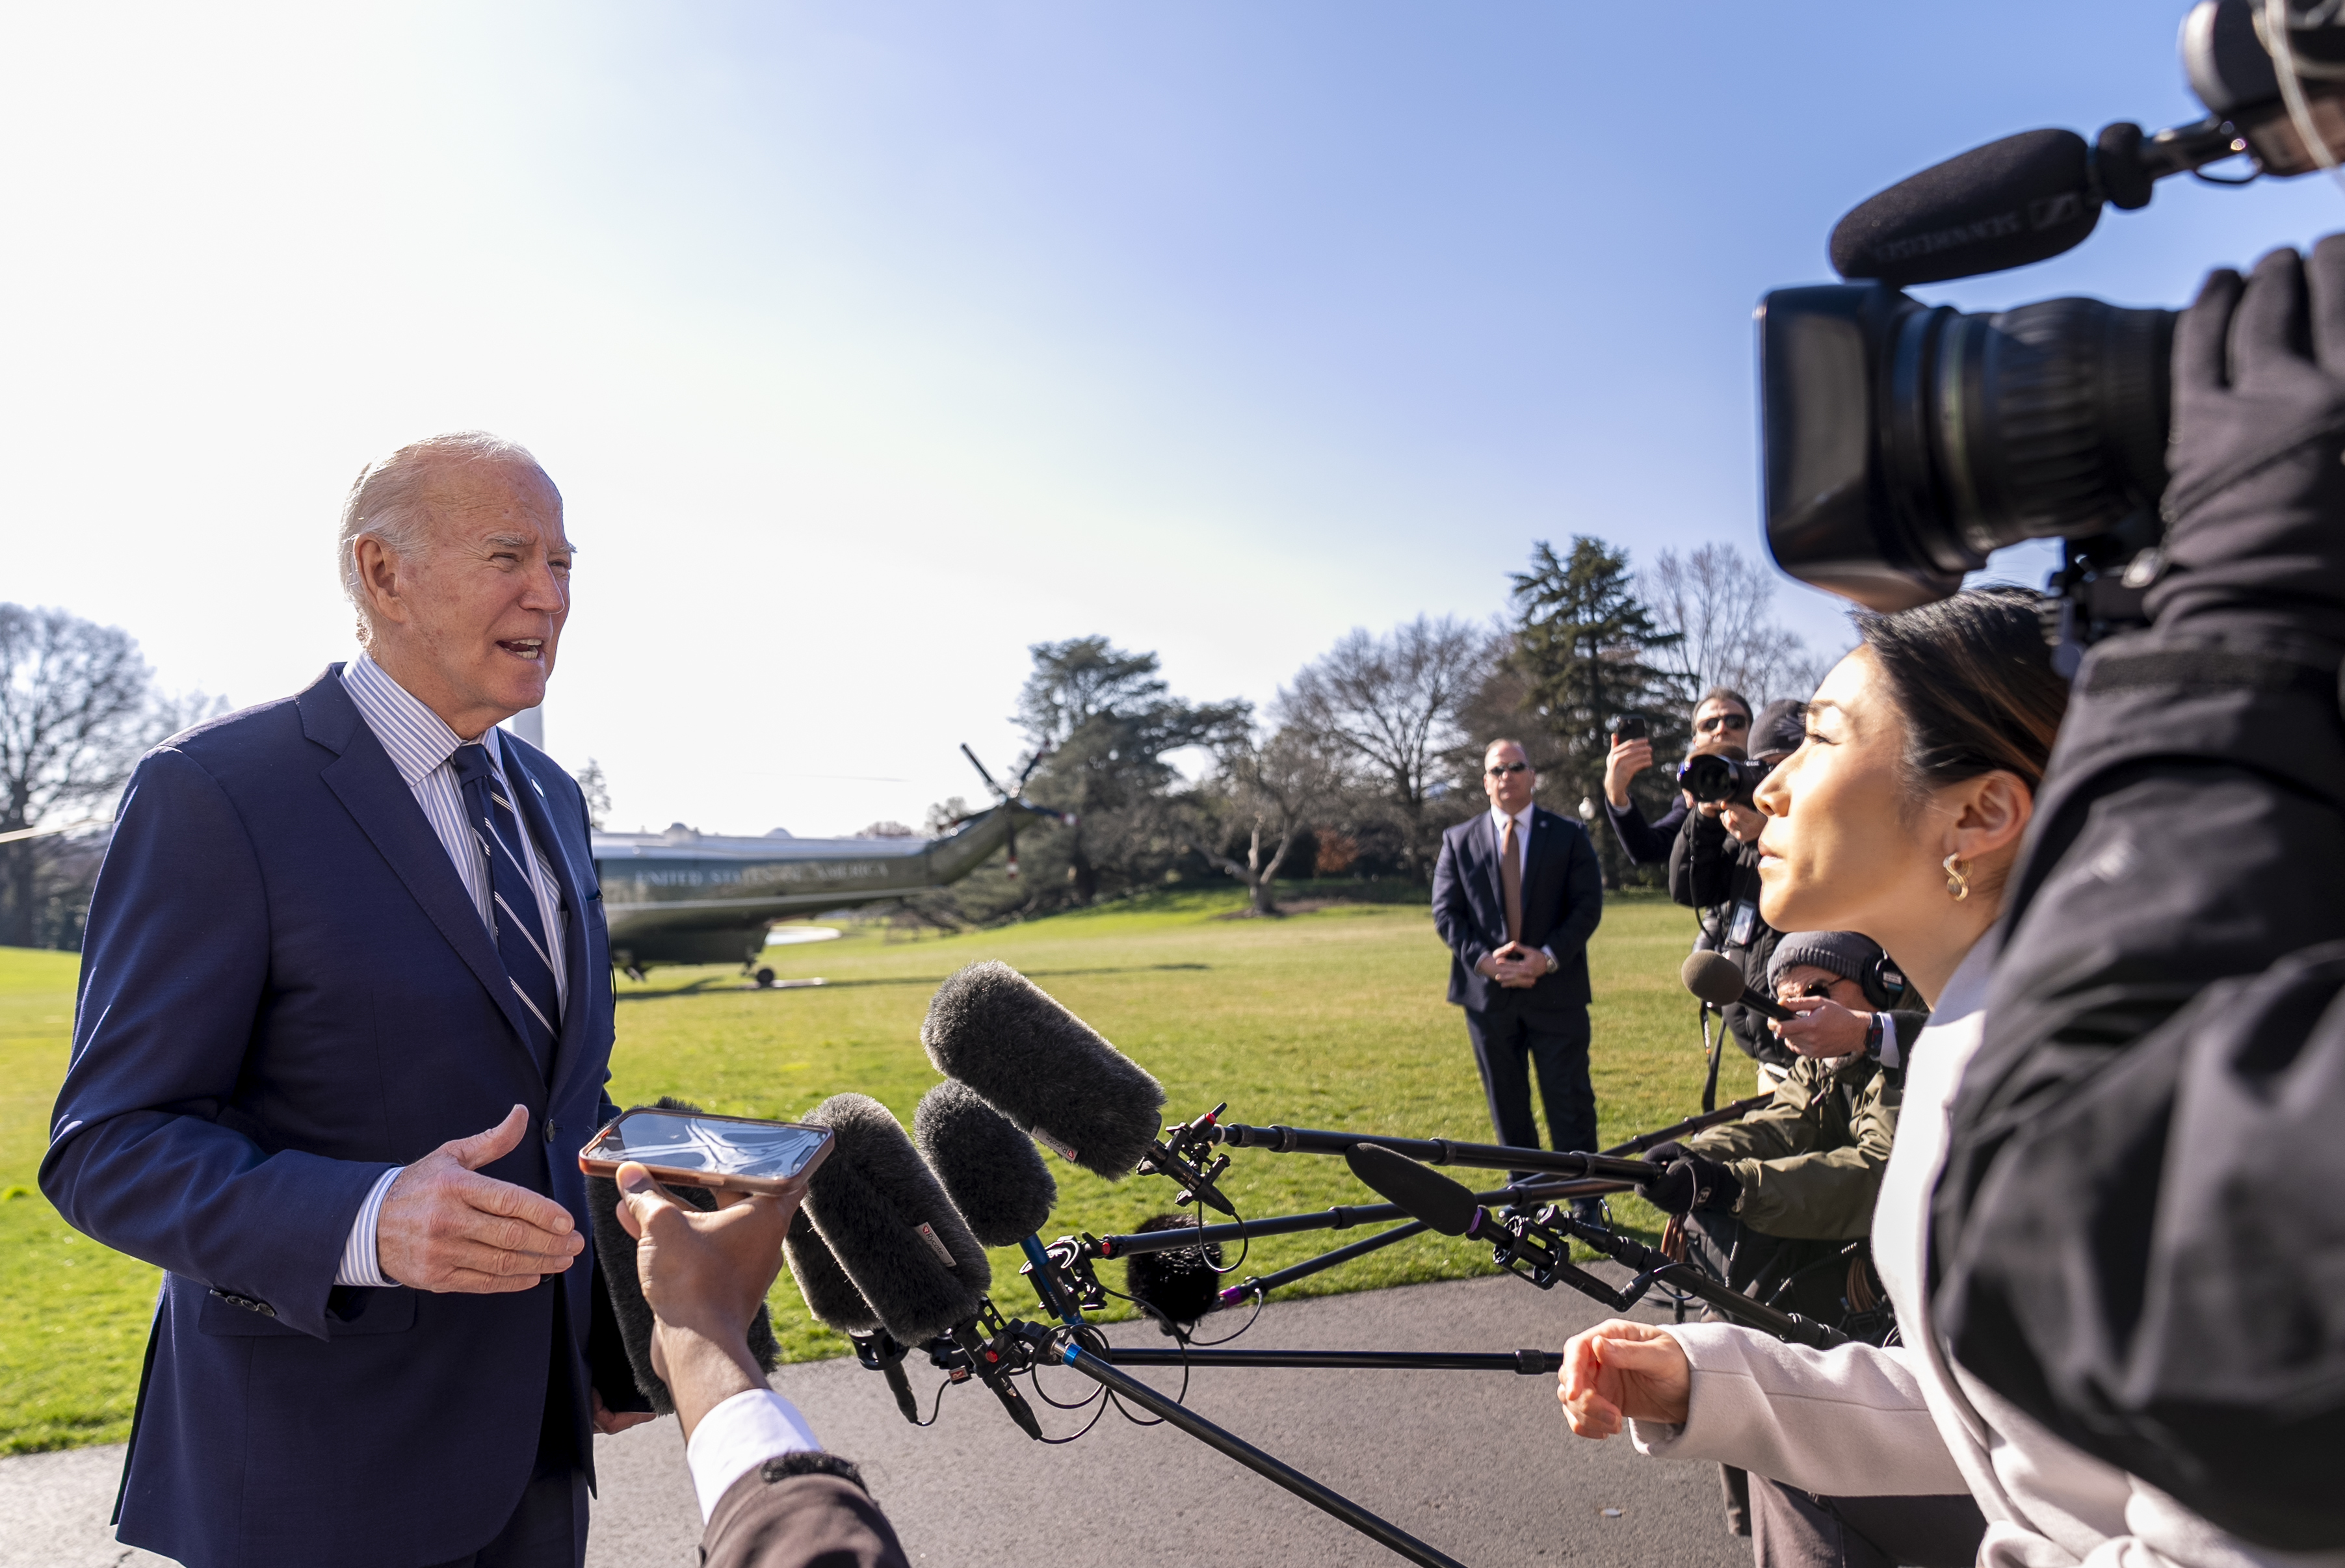 Biden heads to California to rev up his fundraising in anticipation of costly rematch with Trump